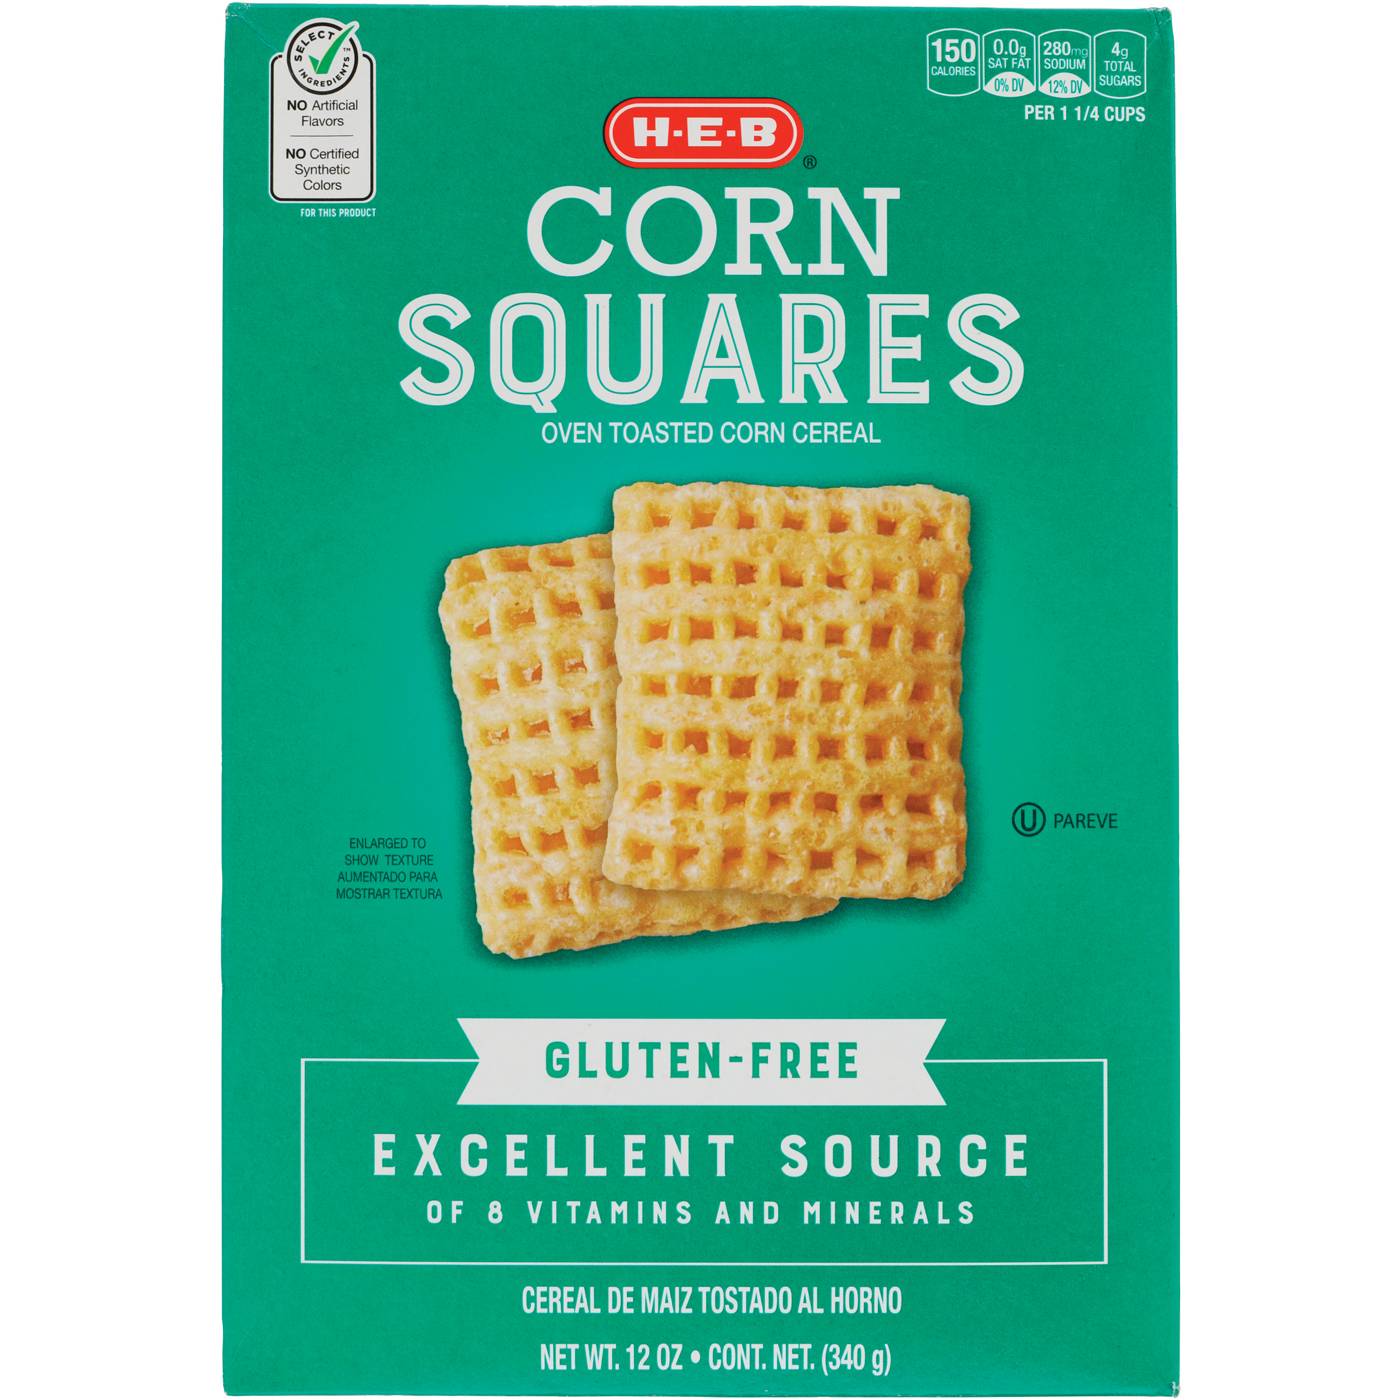 H-E-B Corn Squares Cereal; image 1 of 2